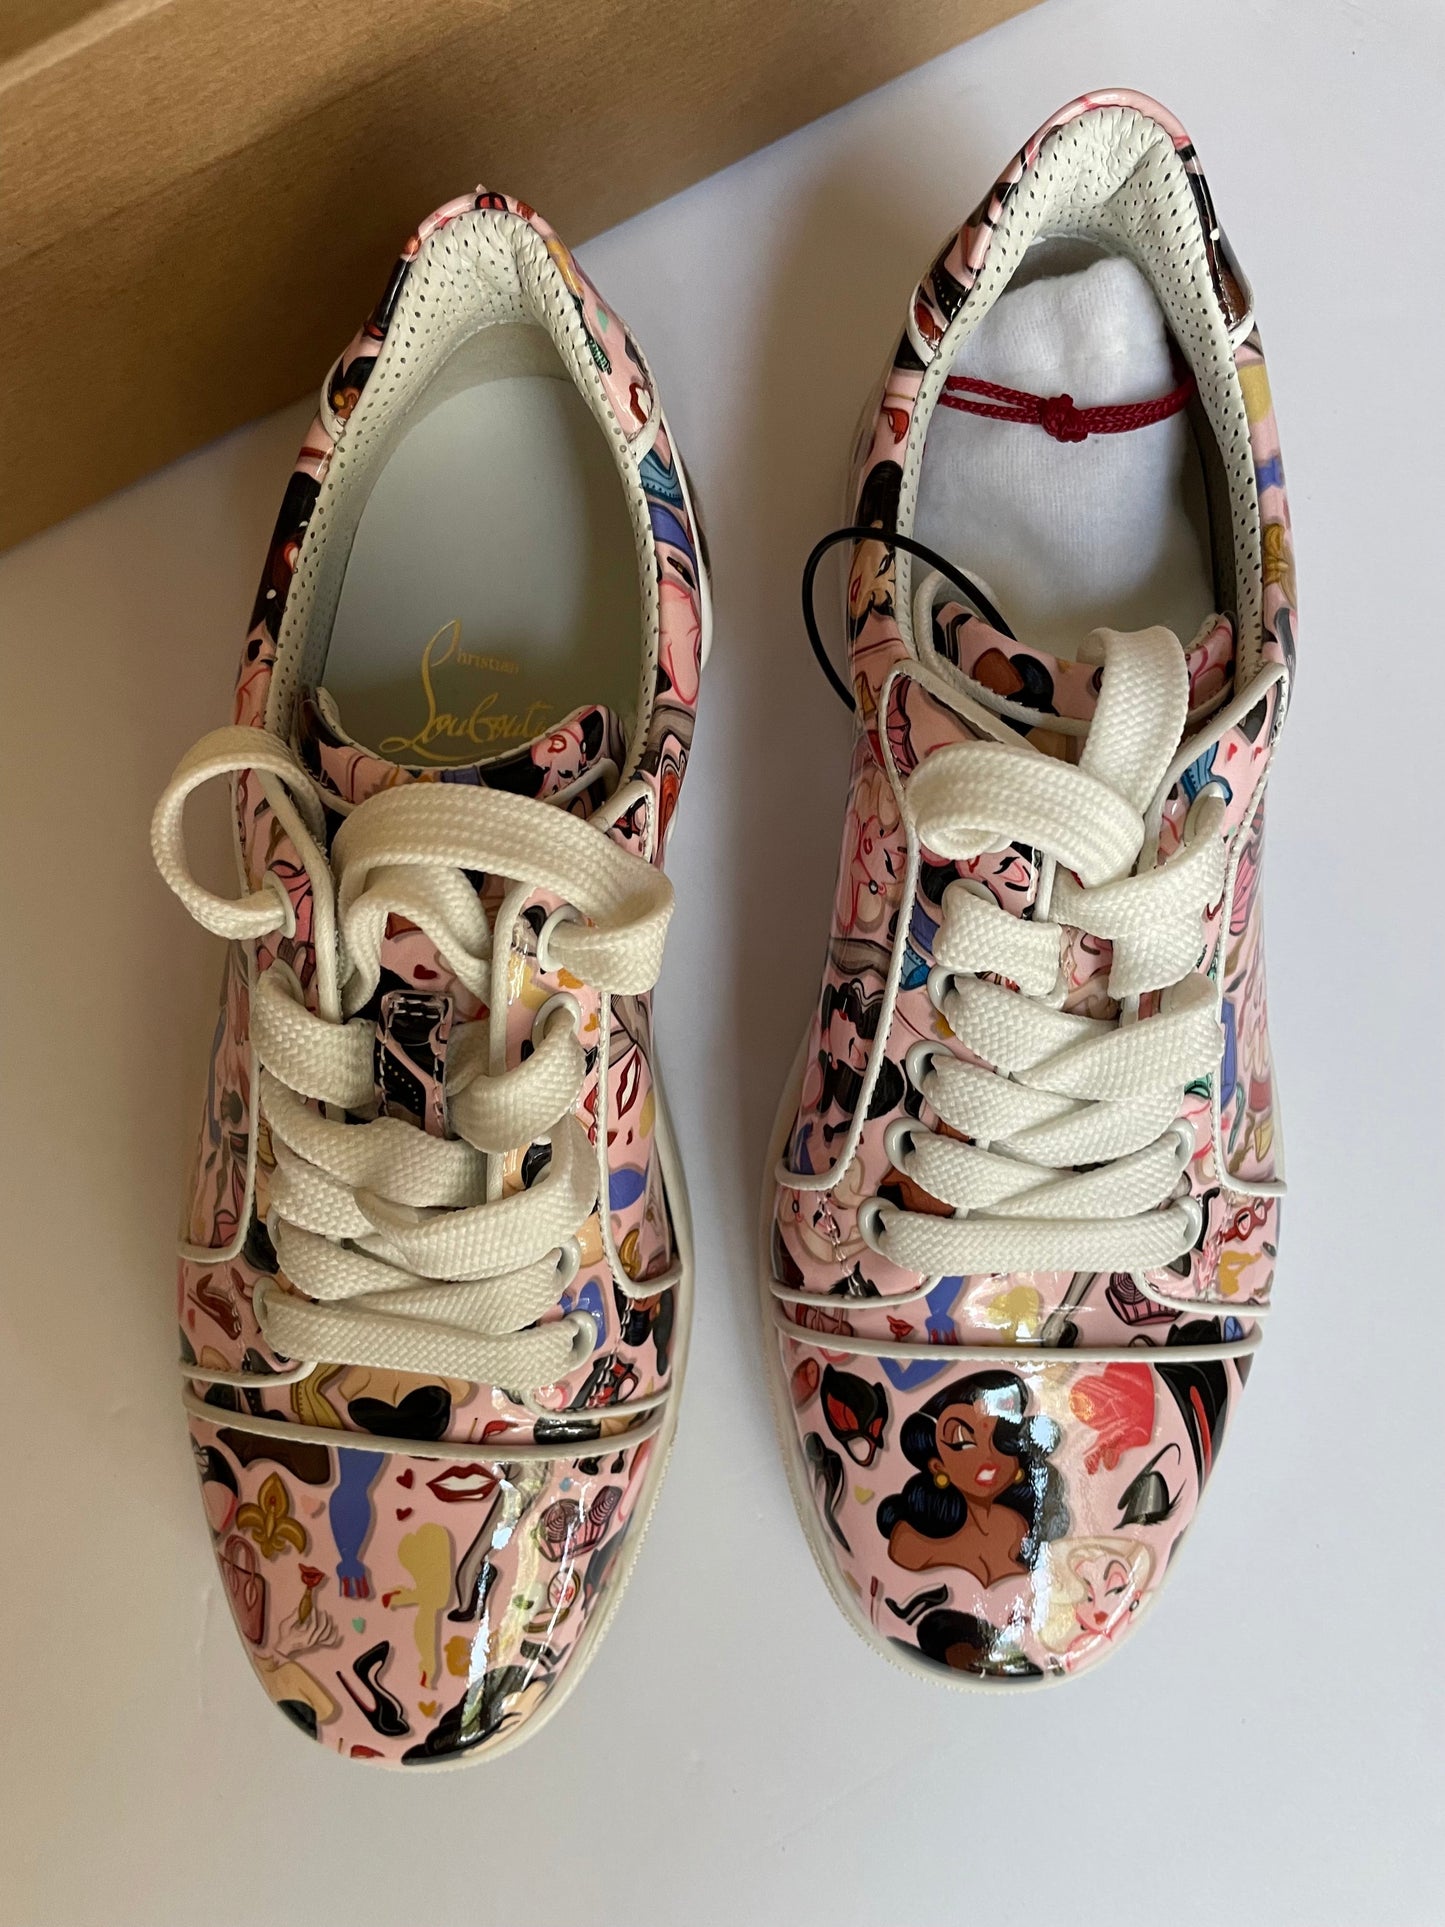 Multi-colored Shoes Sneakers Christian Louboutin, Size 6